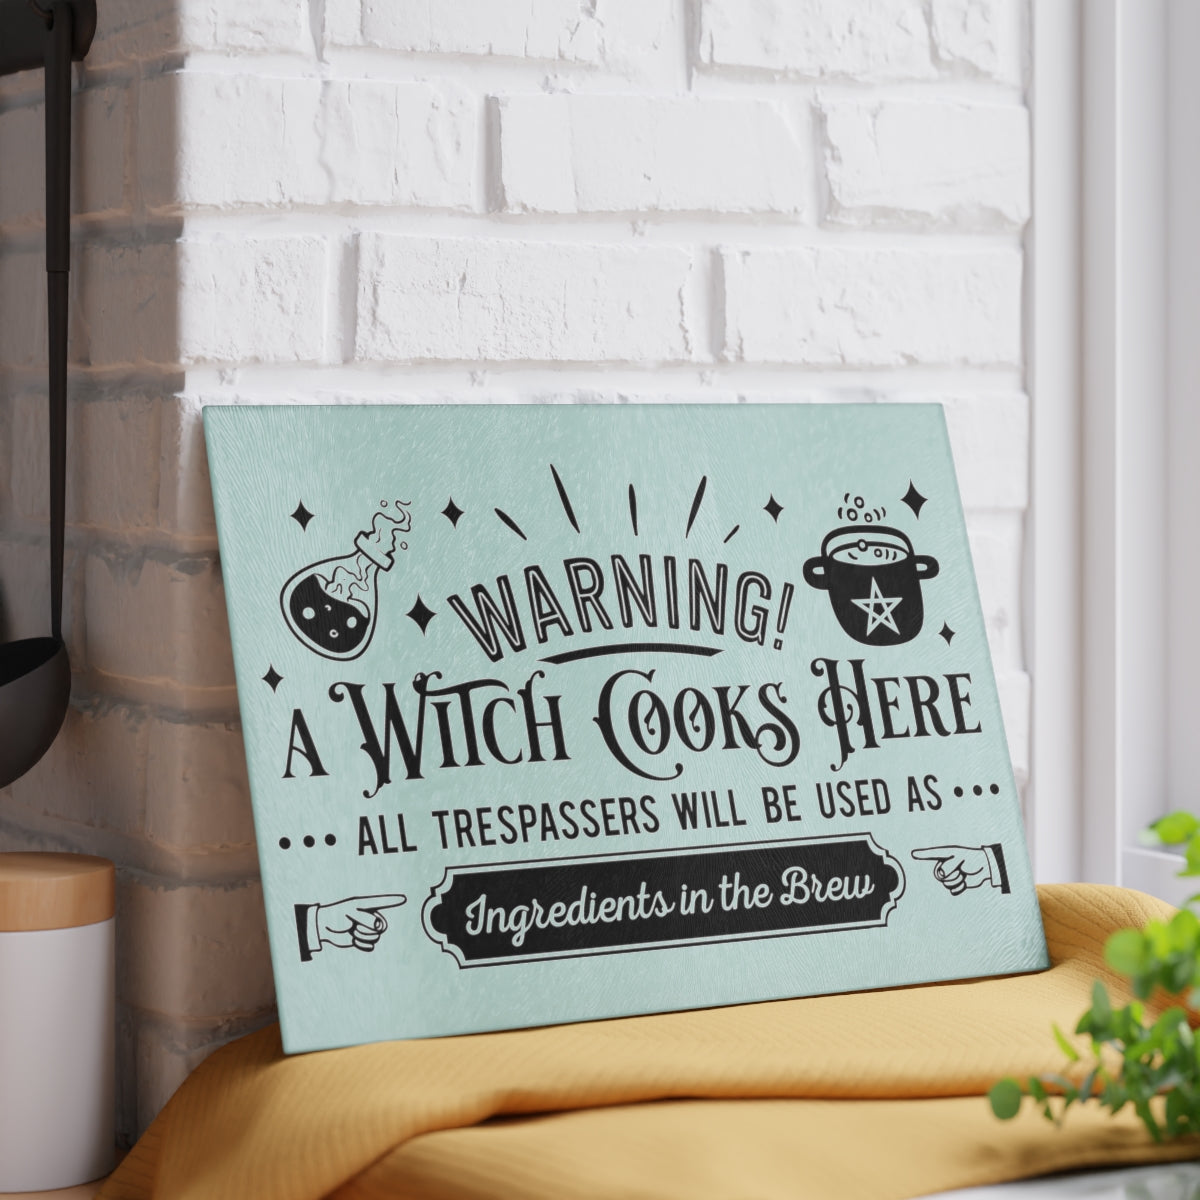 A Witch Cooks Here Glass Cutting Board | Witchy Kitchens - Witchy Kitchens